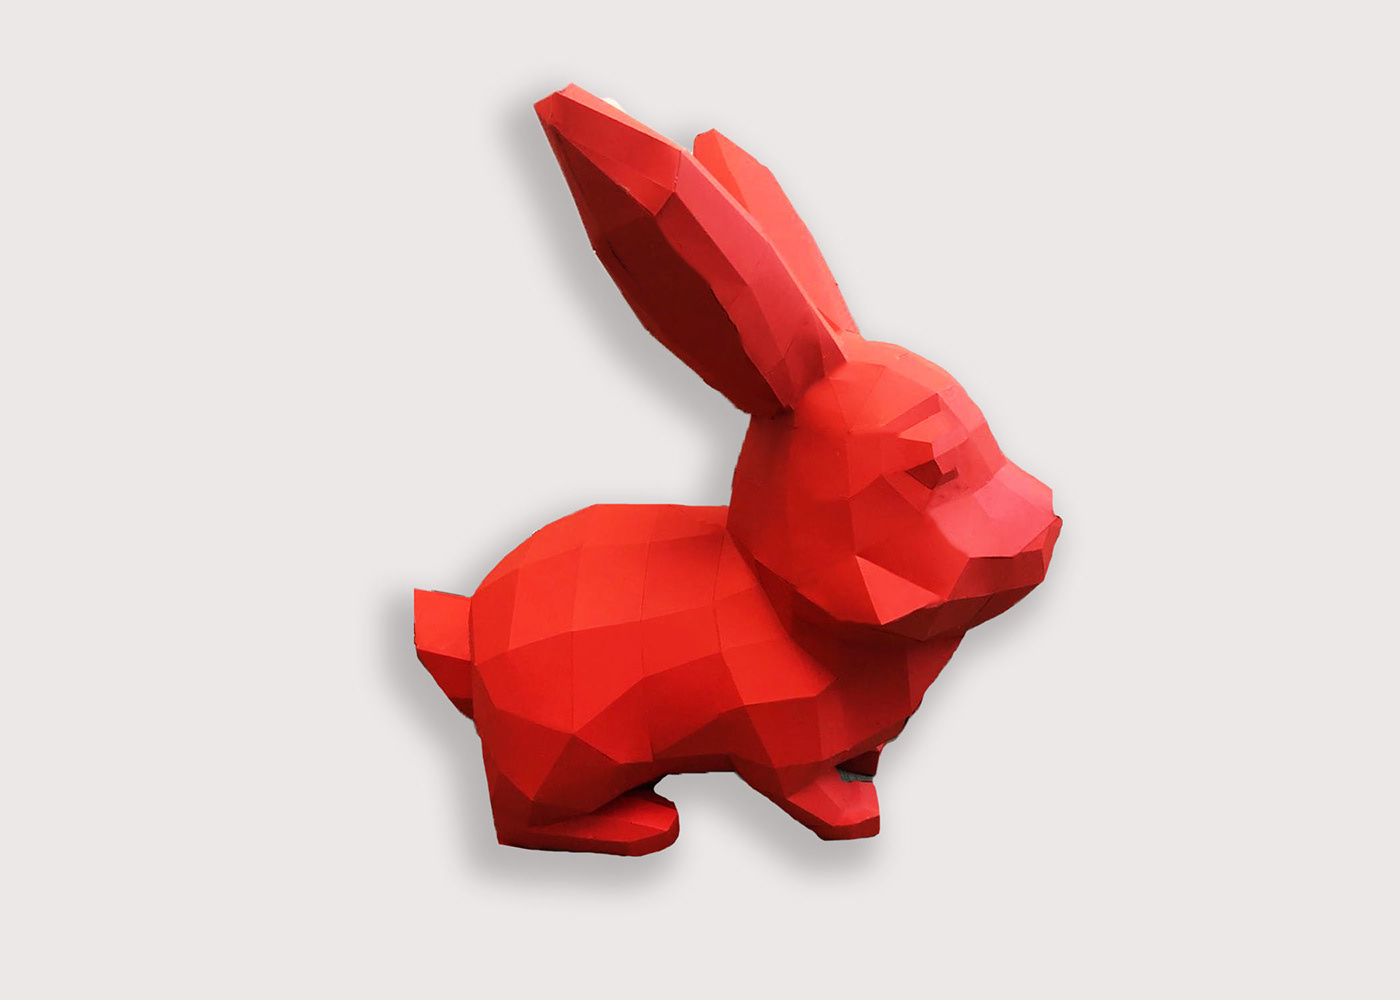 The Rabbit - 3D Paper Craft
Color: Red
Height: 40cm
